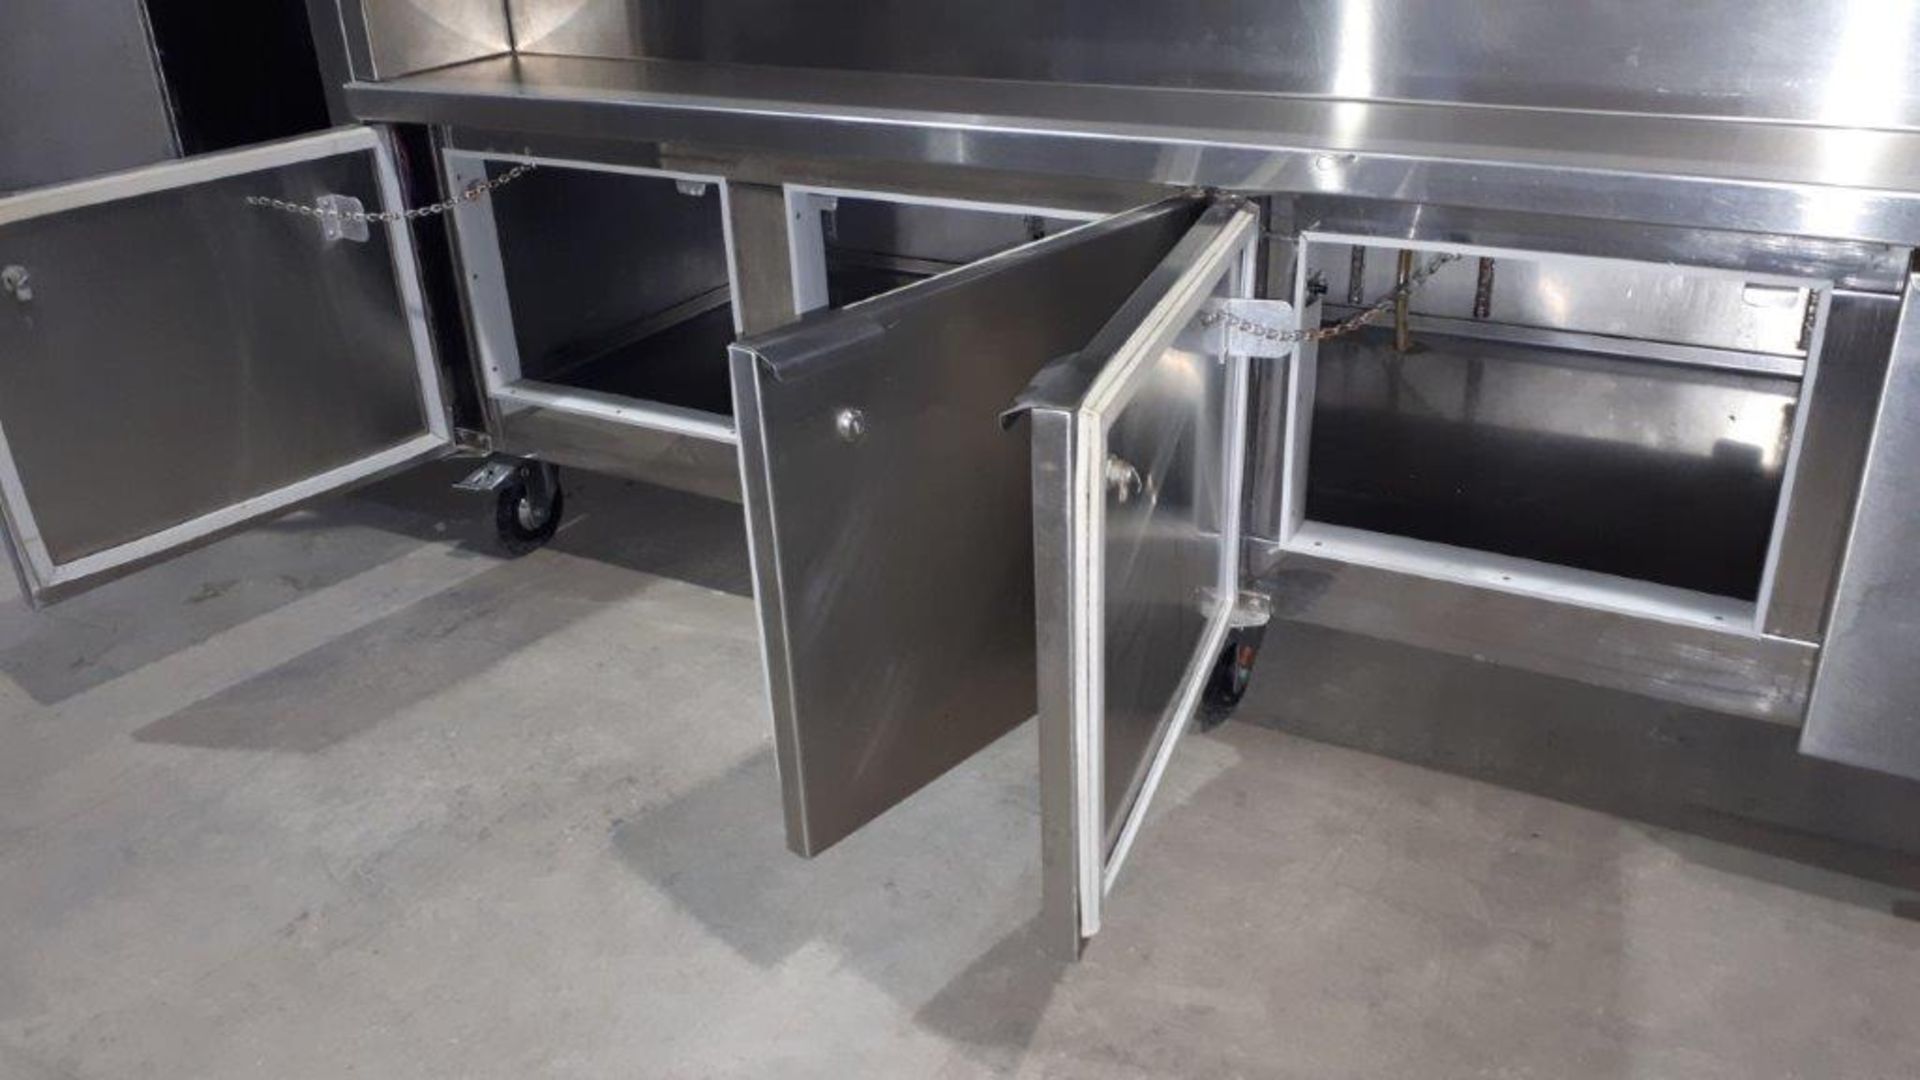 Commercial stainless steel preparation table 36"x100" refrigerated - Image 4 of 4